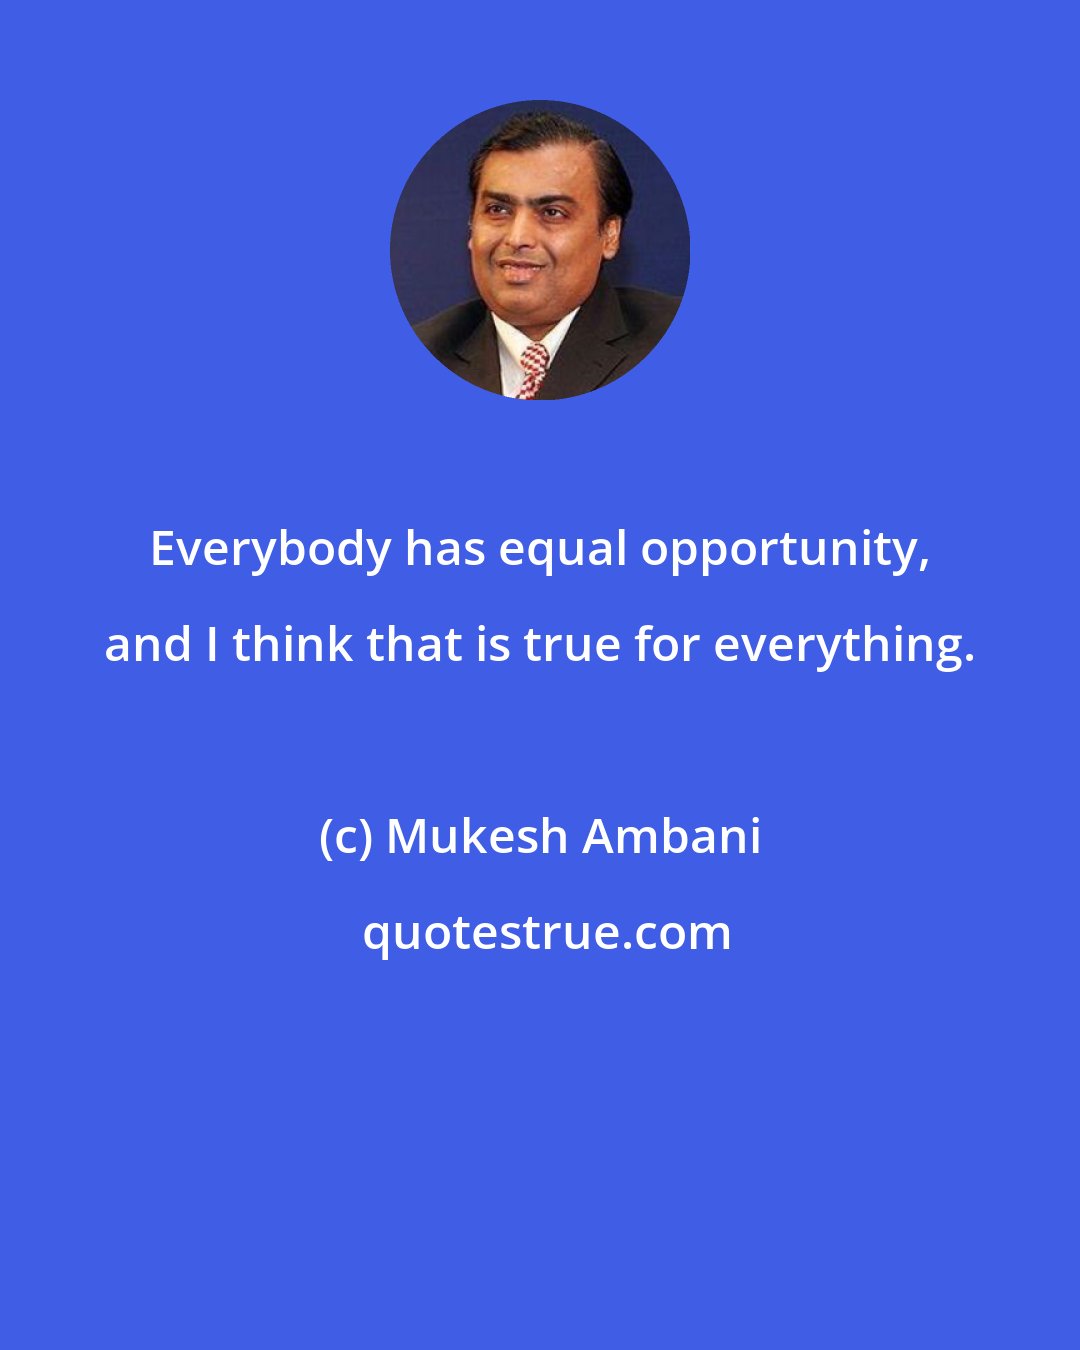 Mukesh Ambani: Everybody has equal opportunity, and I think that is true for everything.